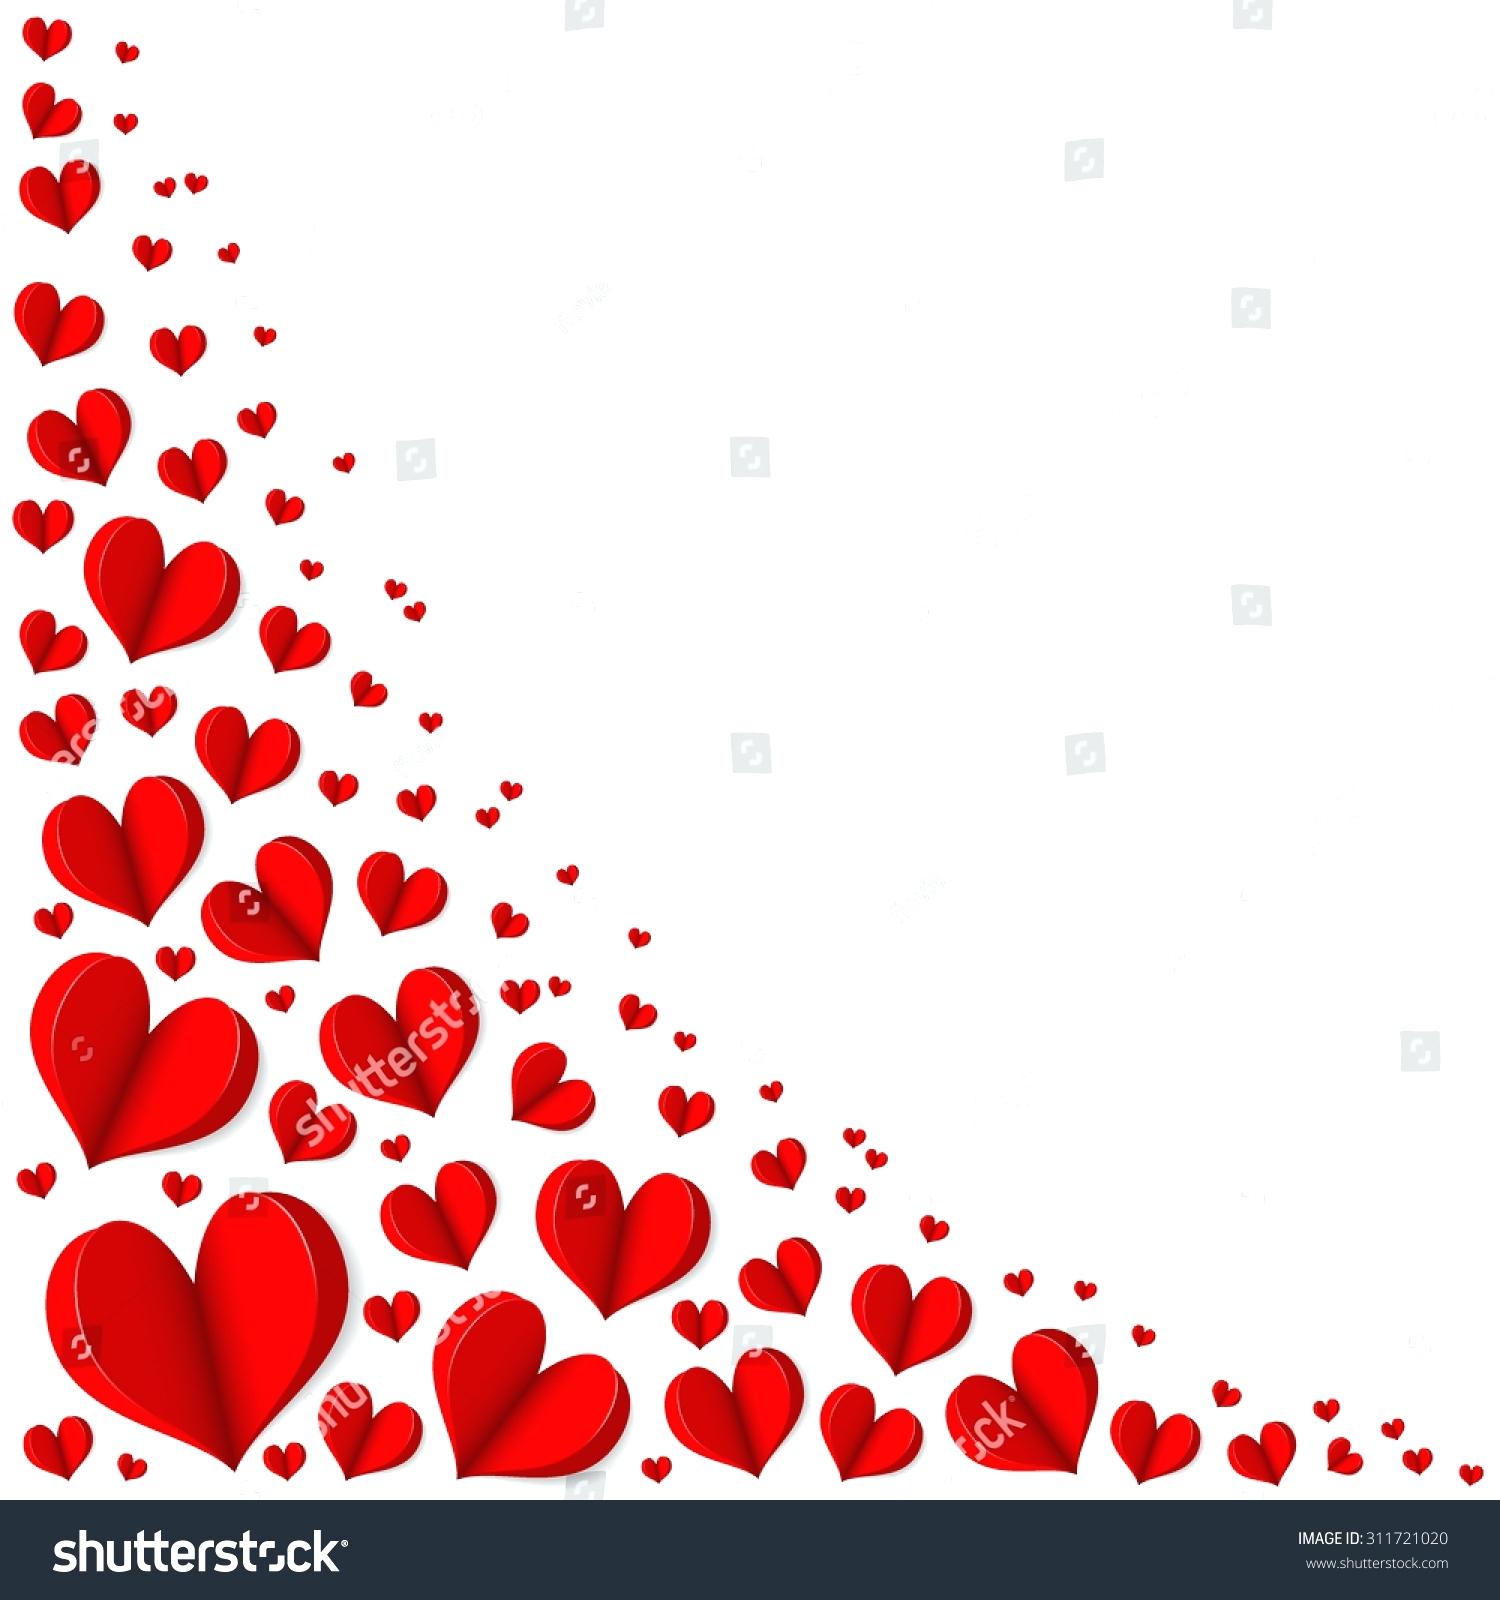 Love Heart Wallpaper Borders Wallpapers Border Get Free High Quality ...